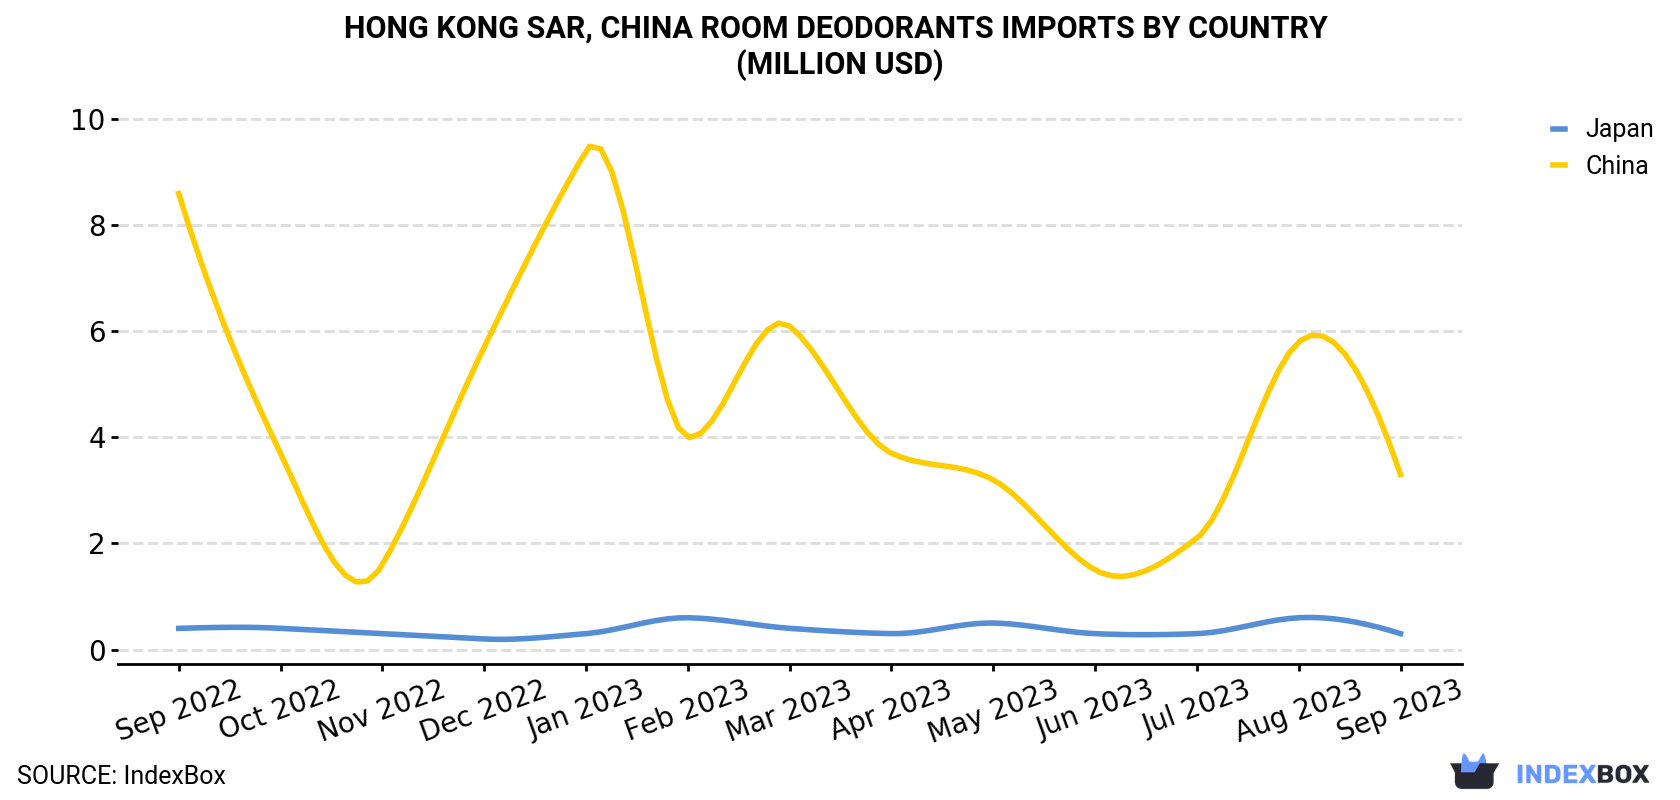 Hong Kong Room Deodorants Imports By Country (Million USD)